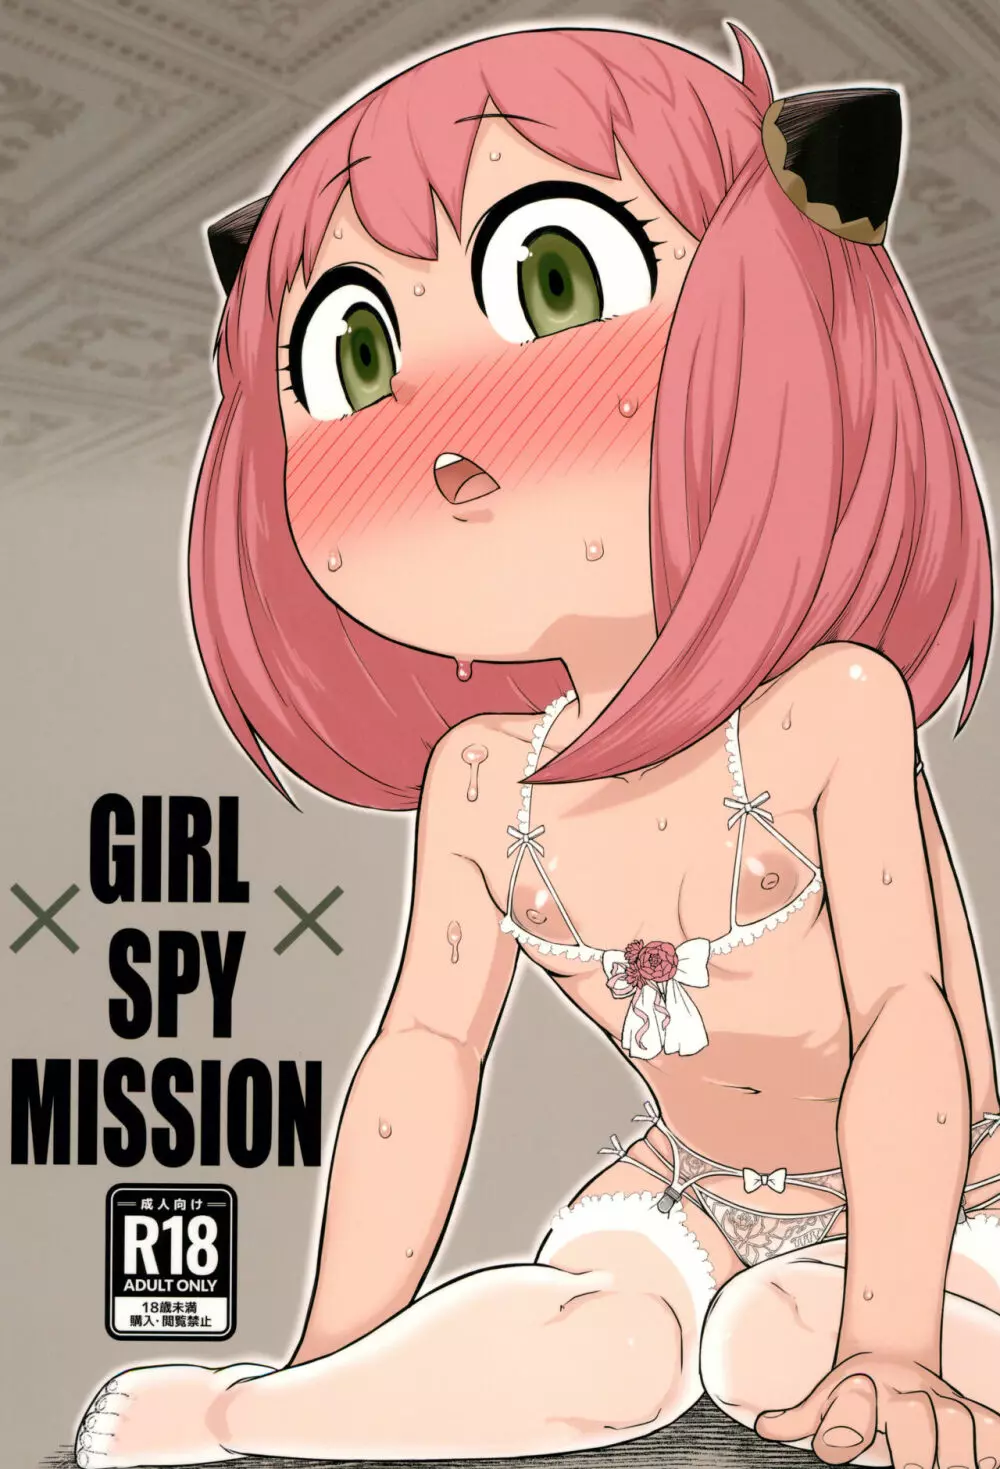 GIRL SPY MISSION Page.1